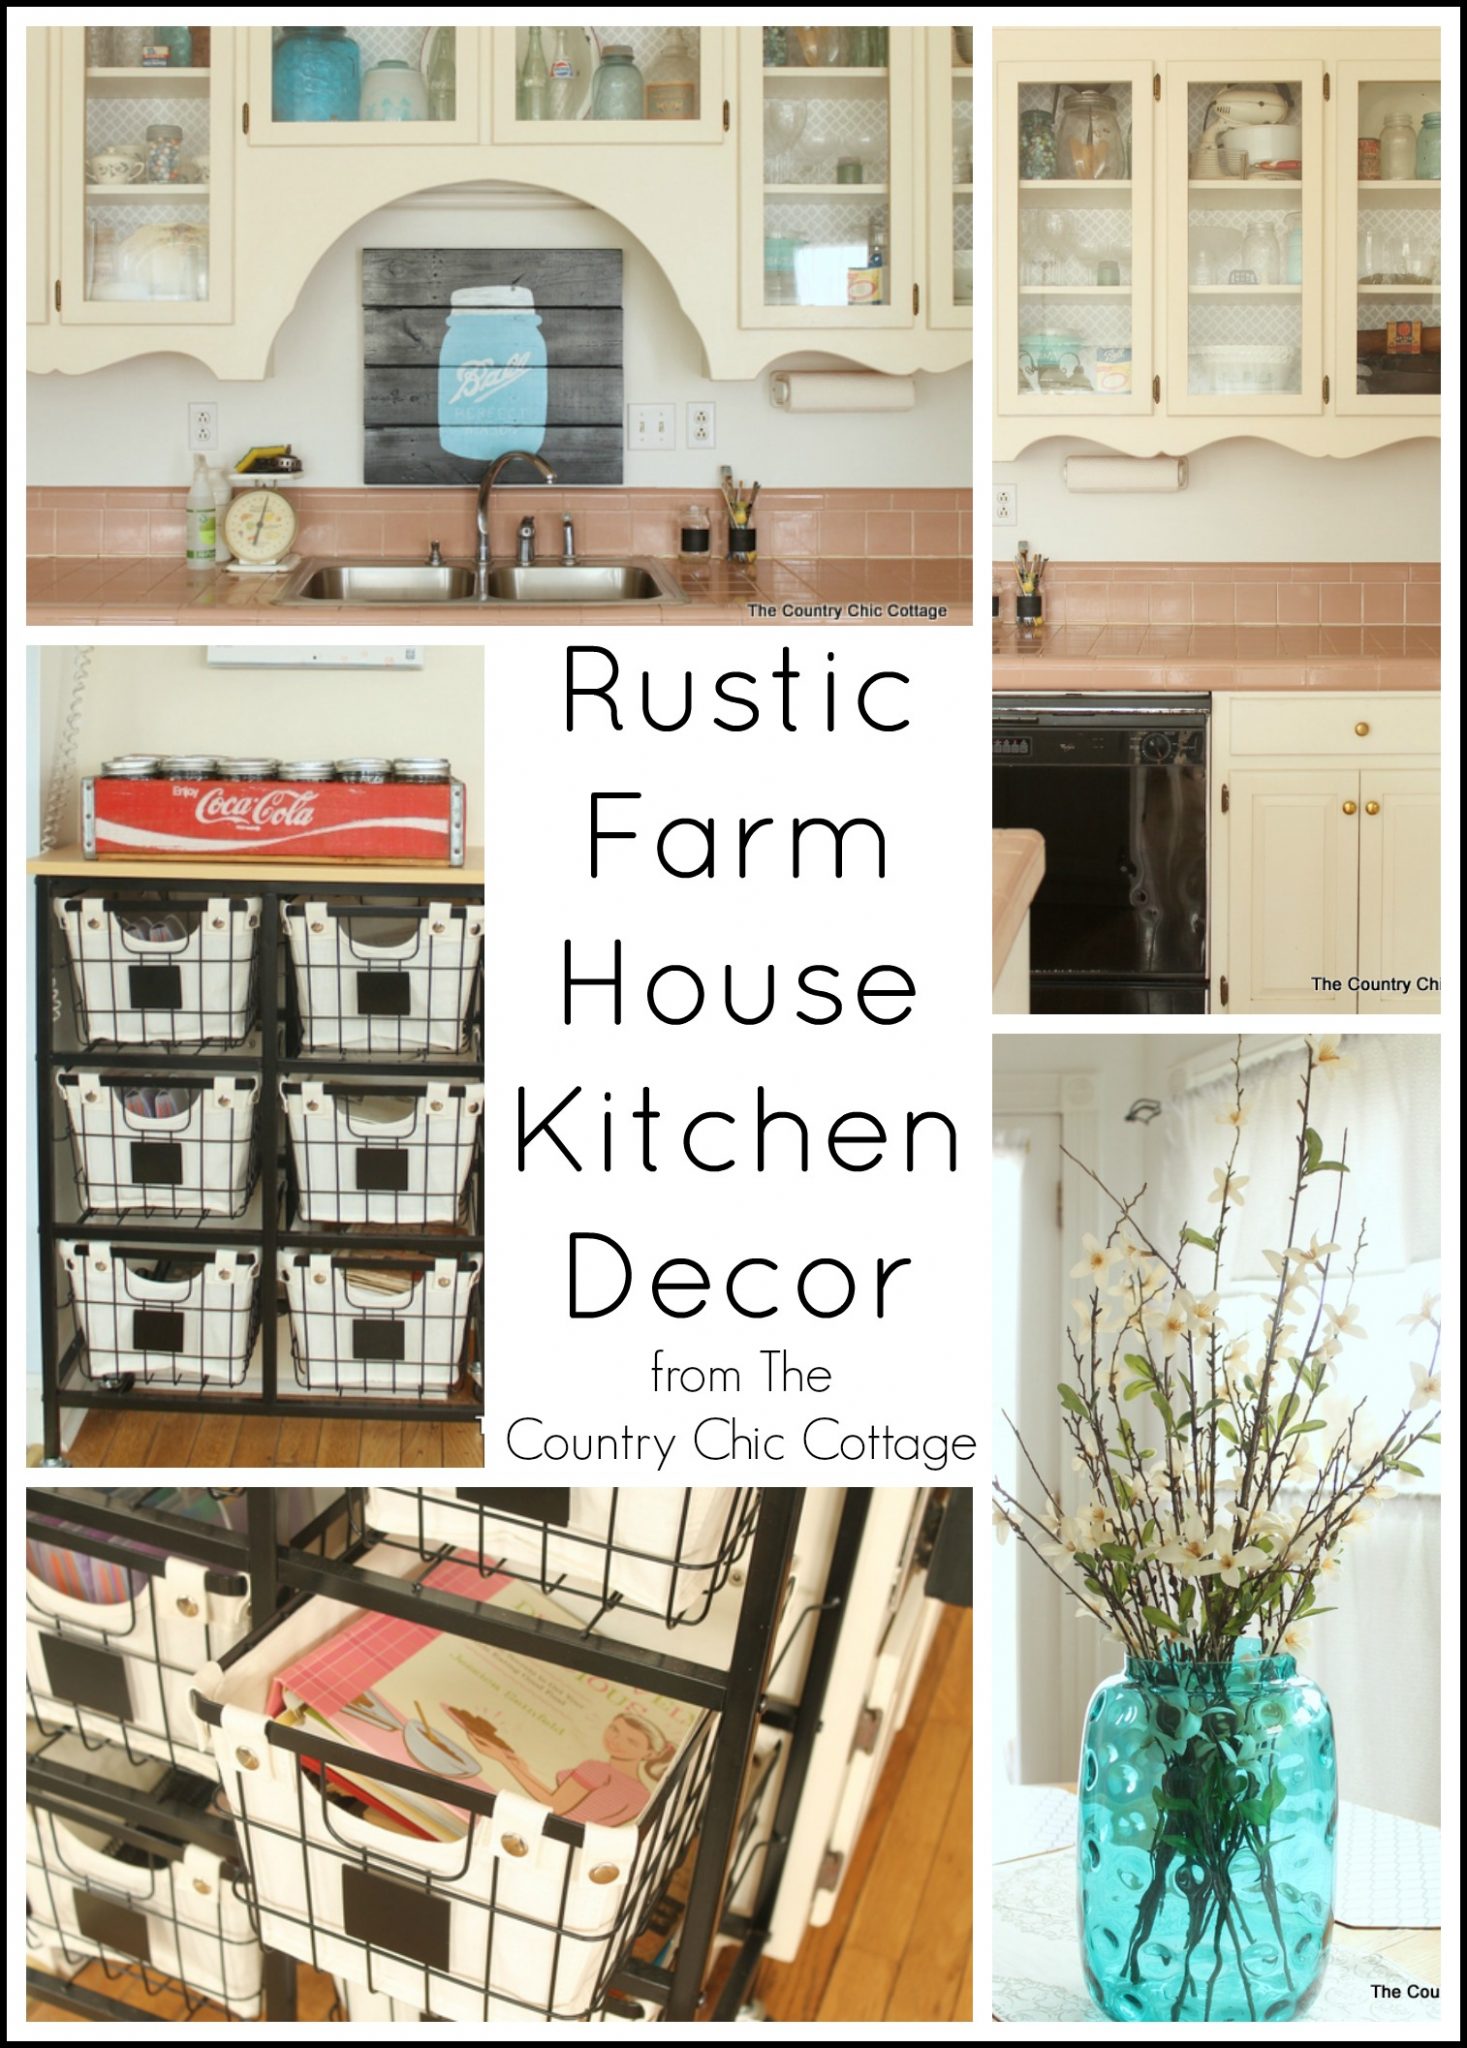 https://www.thecountrychiccottage.net/wp-content/uploads/2015/02/rustic-farmhouse-kitchen-decor.jpg